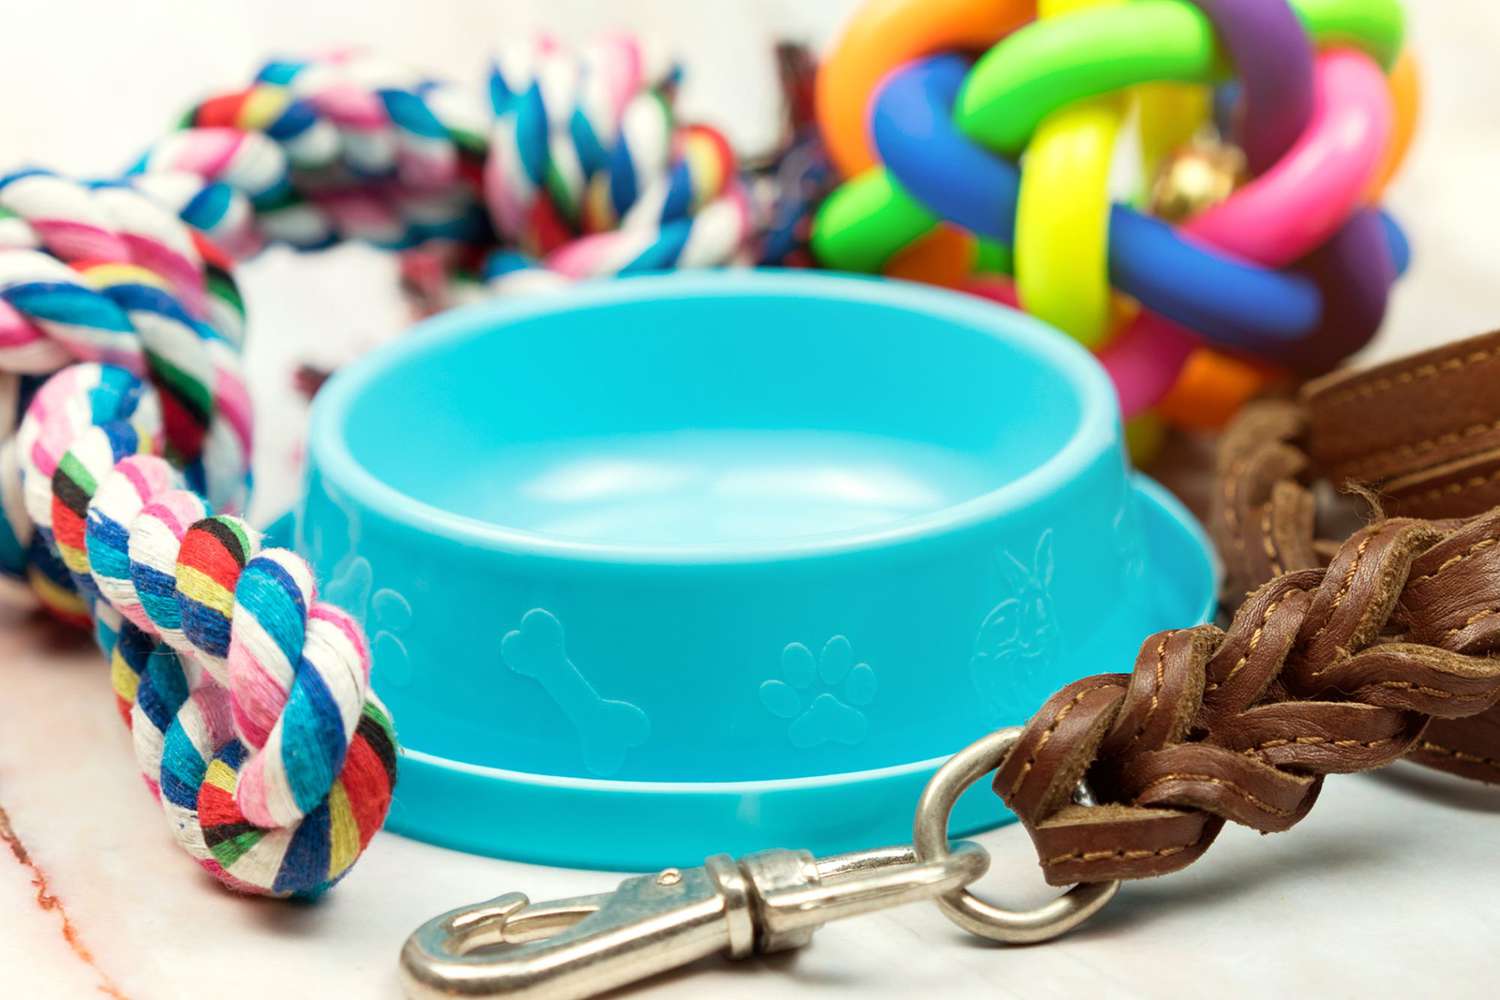 pet supplies for donations at your dog's gotcha day party